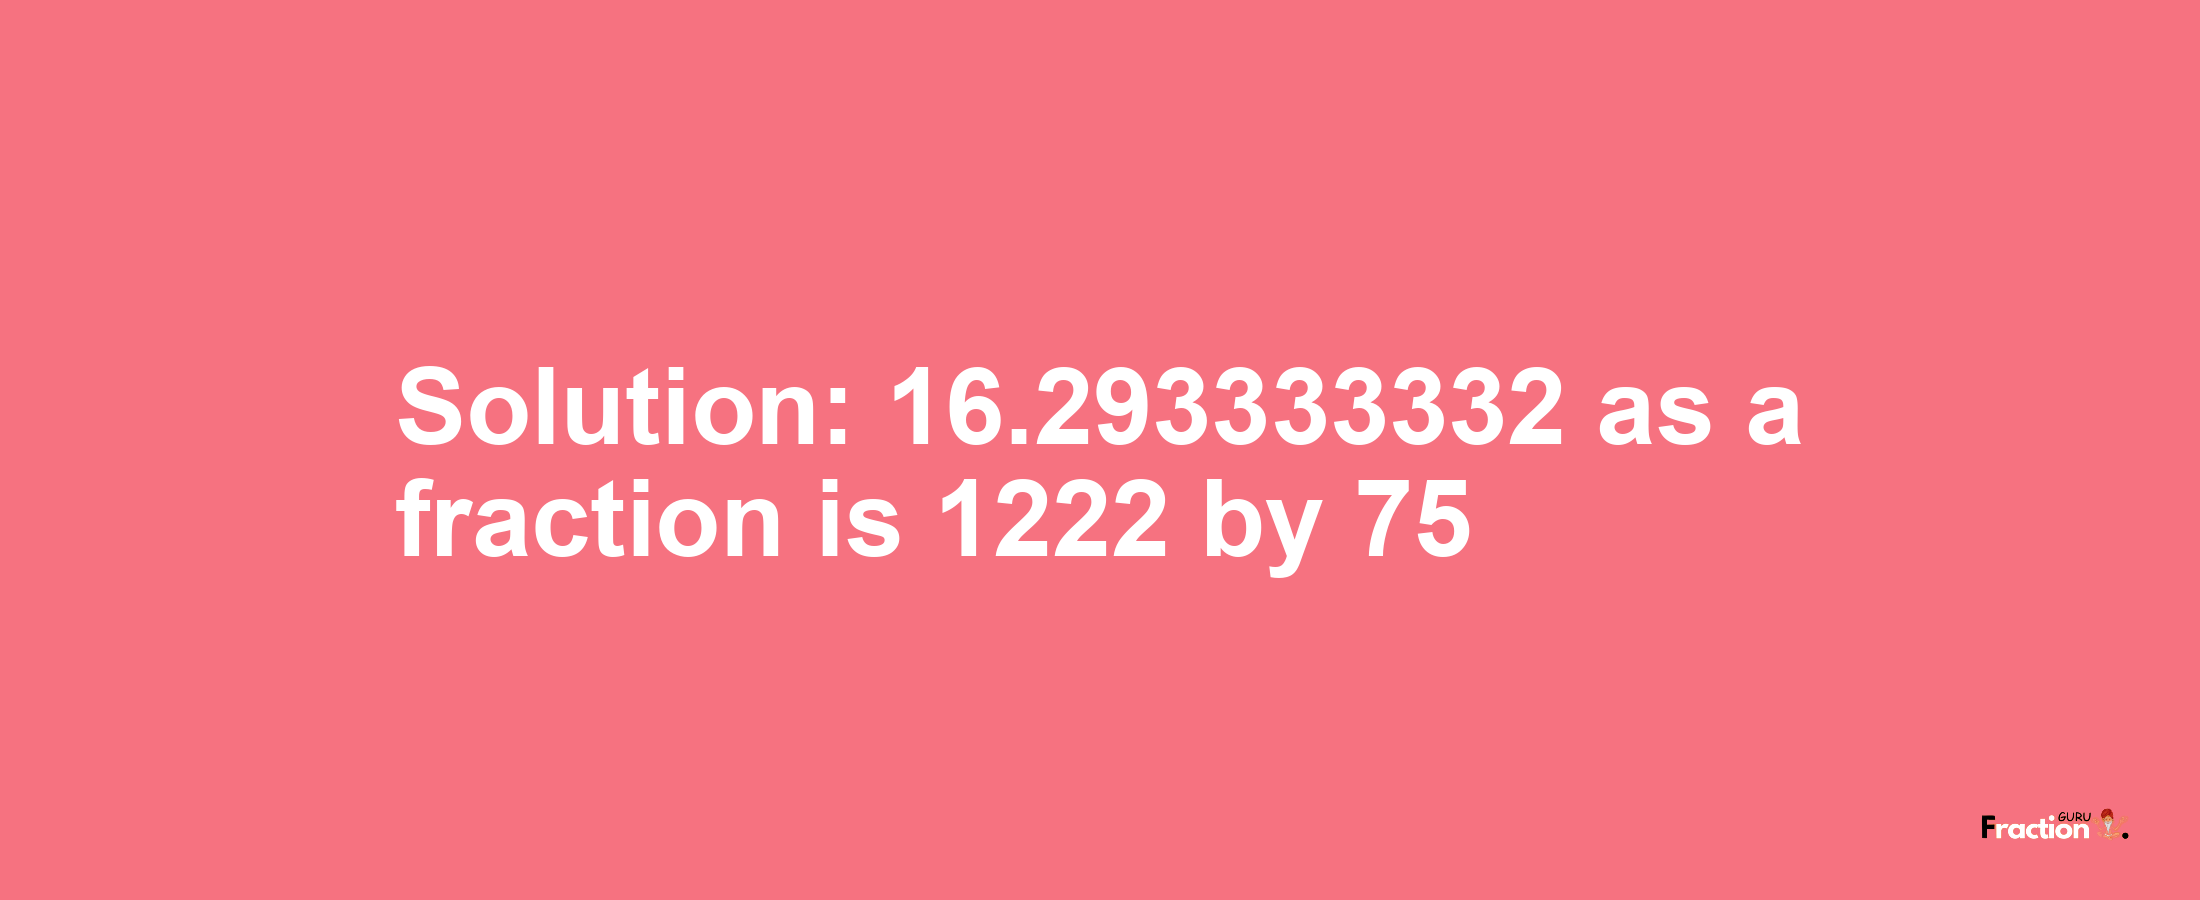 Solution:16.293333332 as a fraction is 1222/75